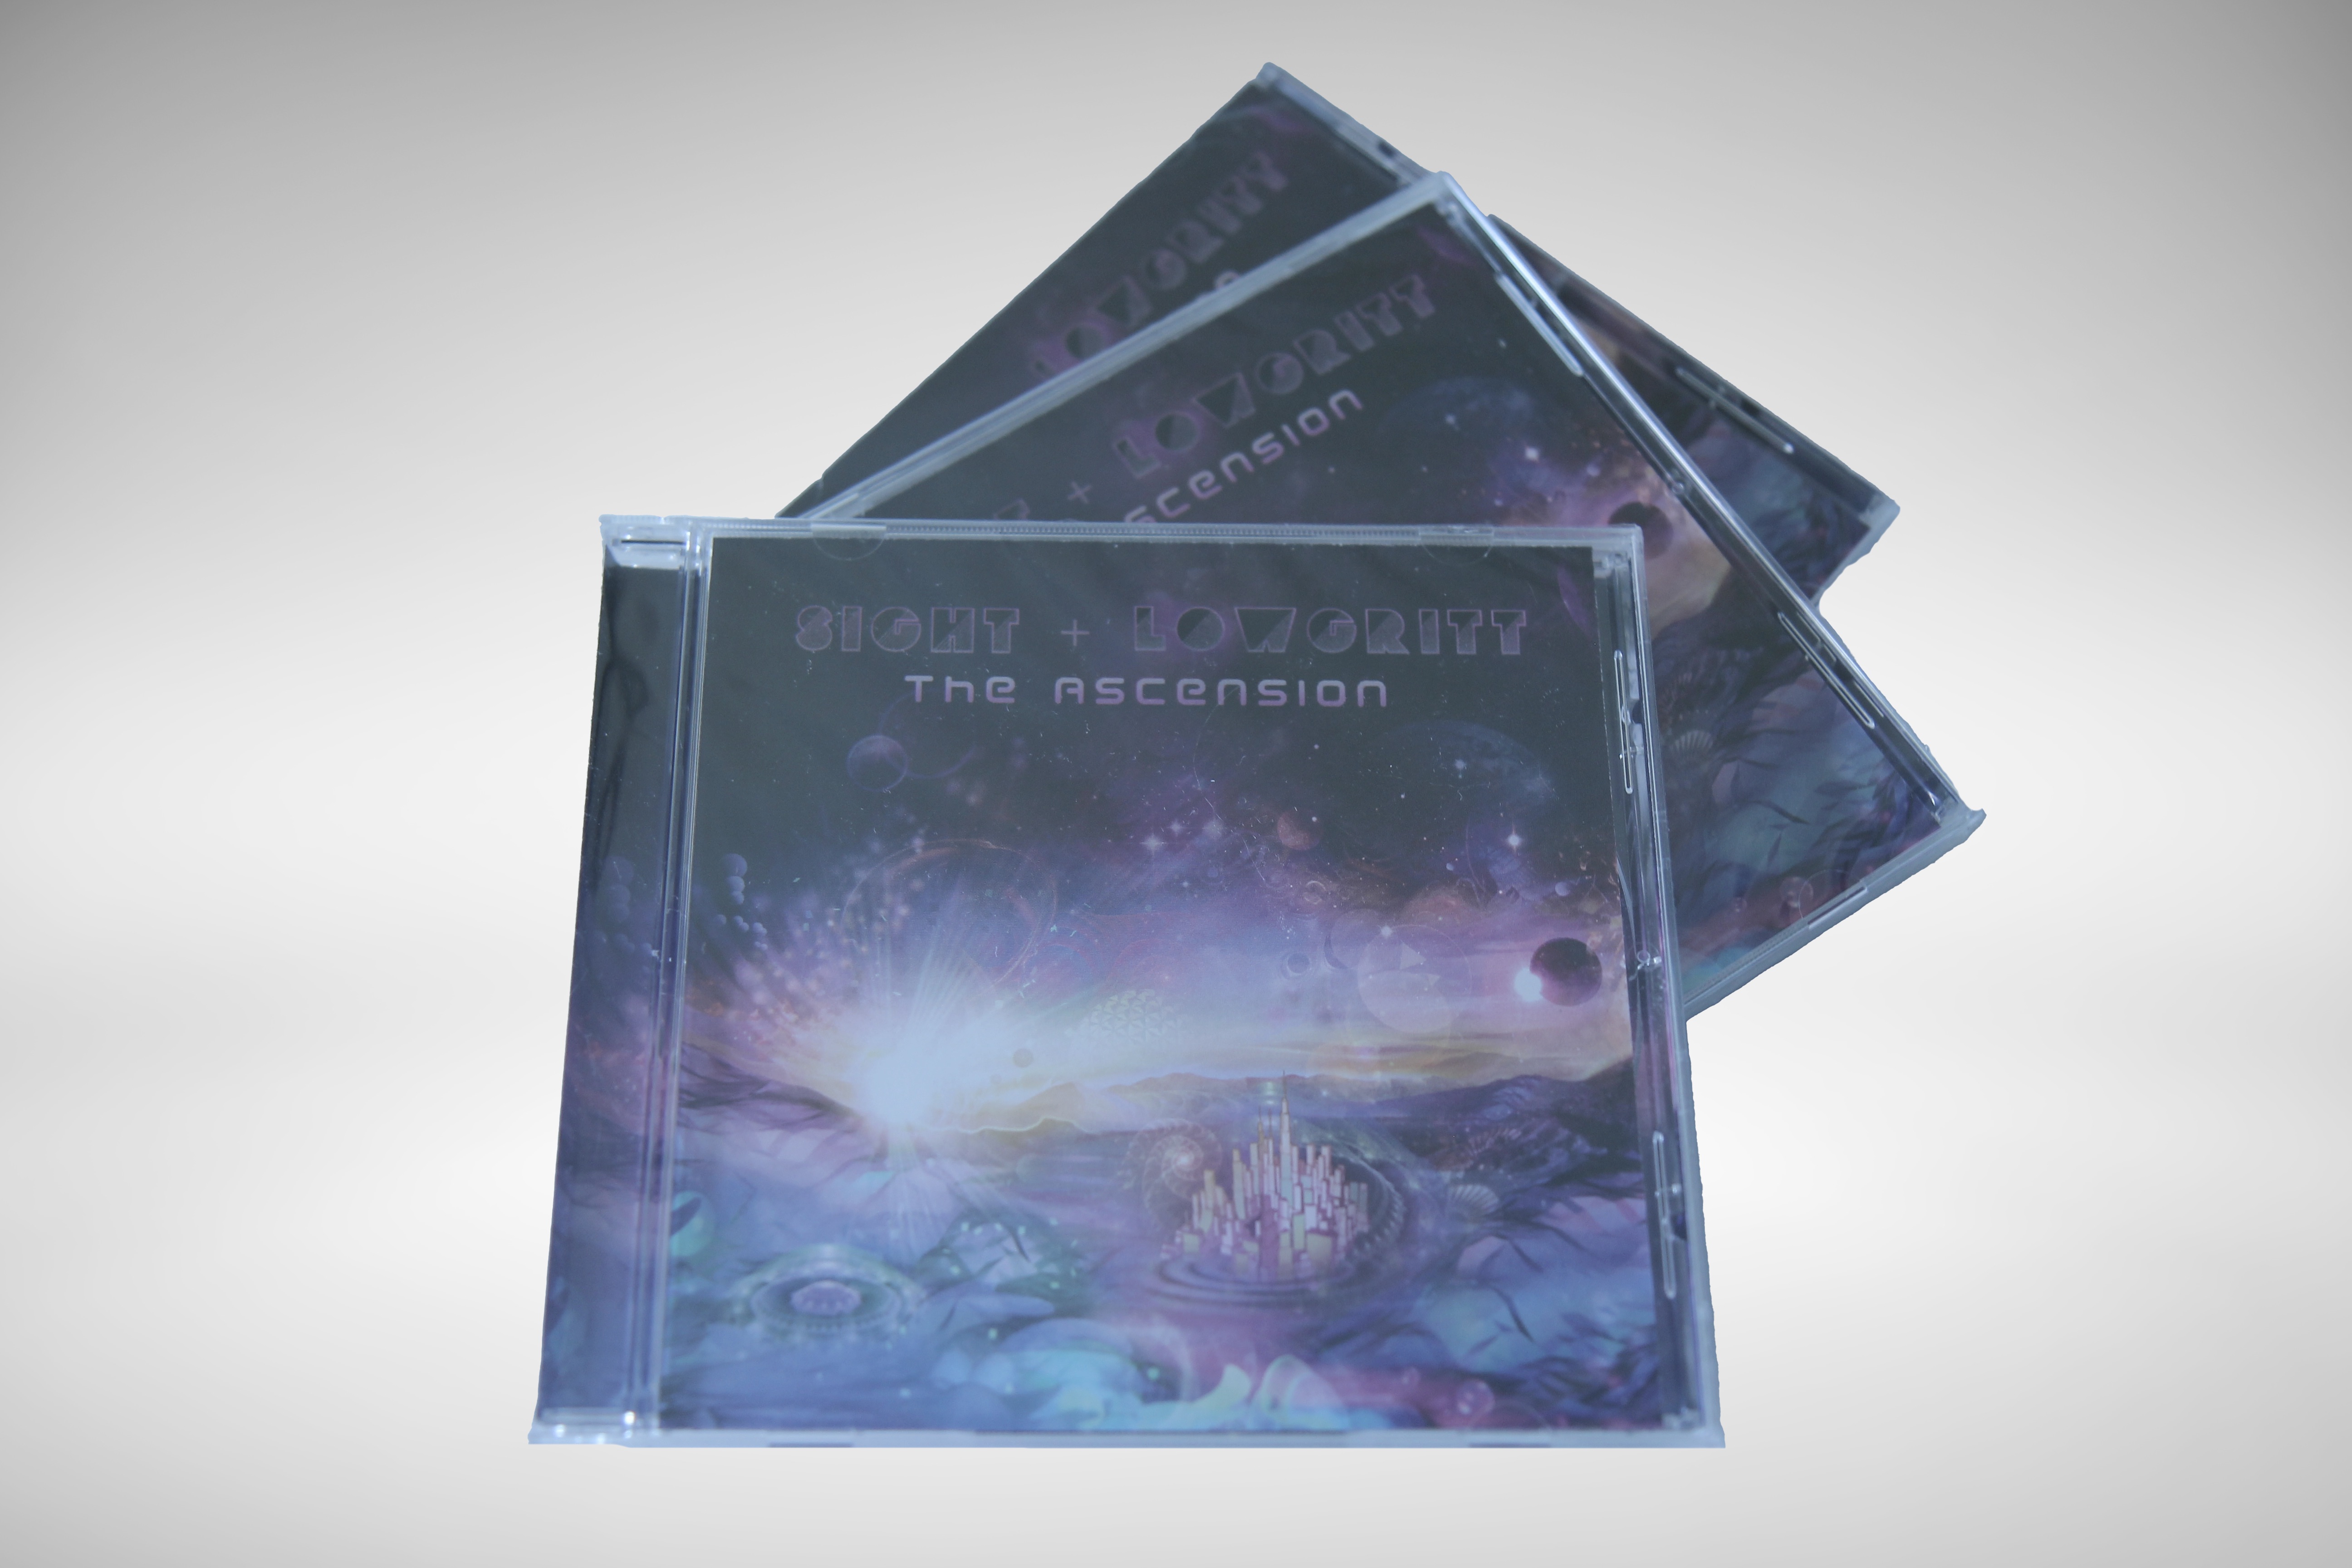 Physical CD of the full length album The Ascension LP by Sight & Lowgritt